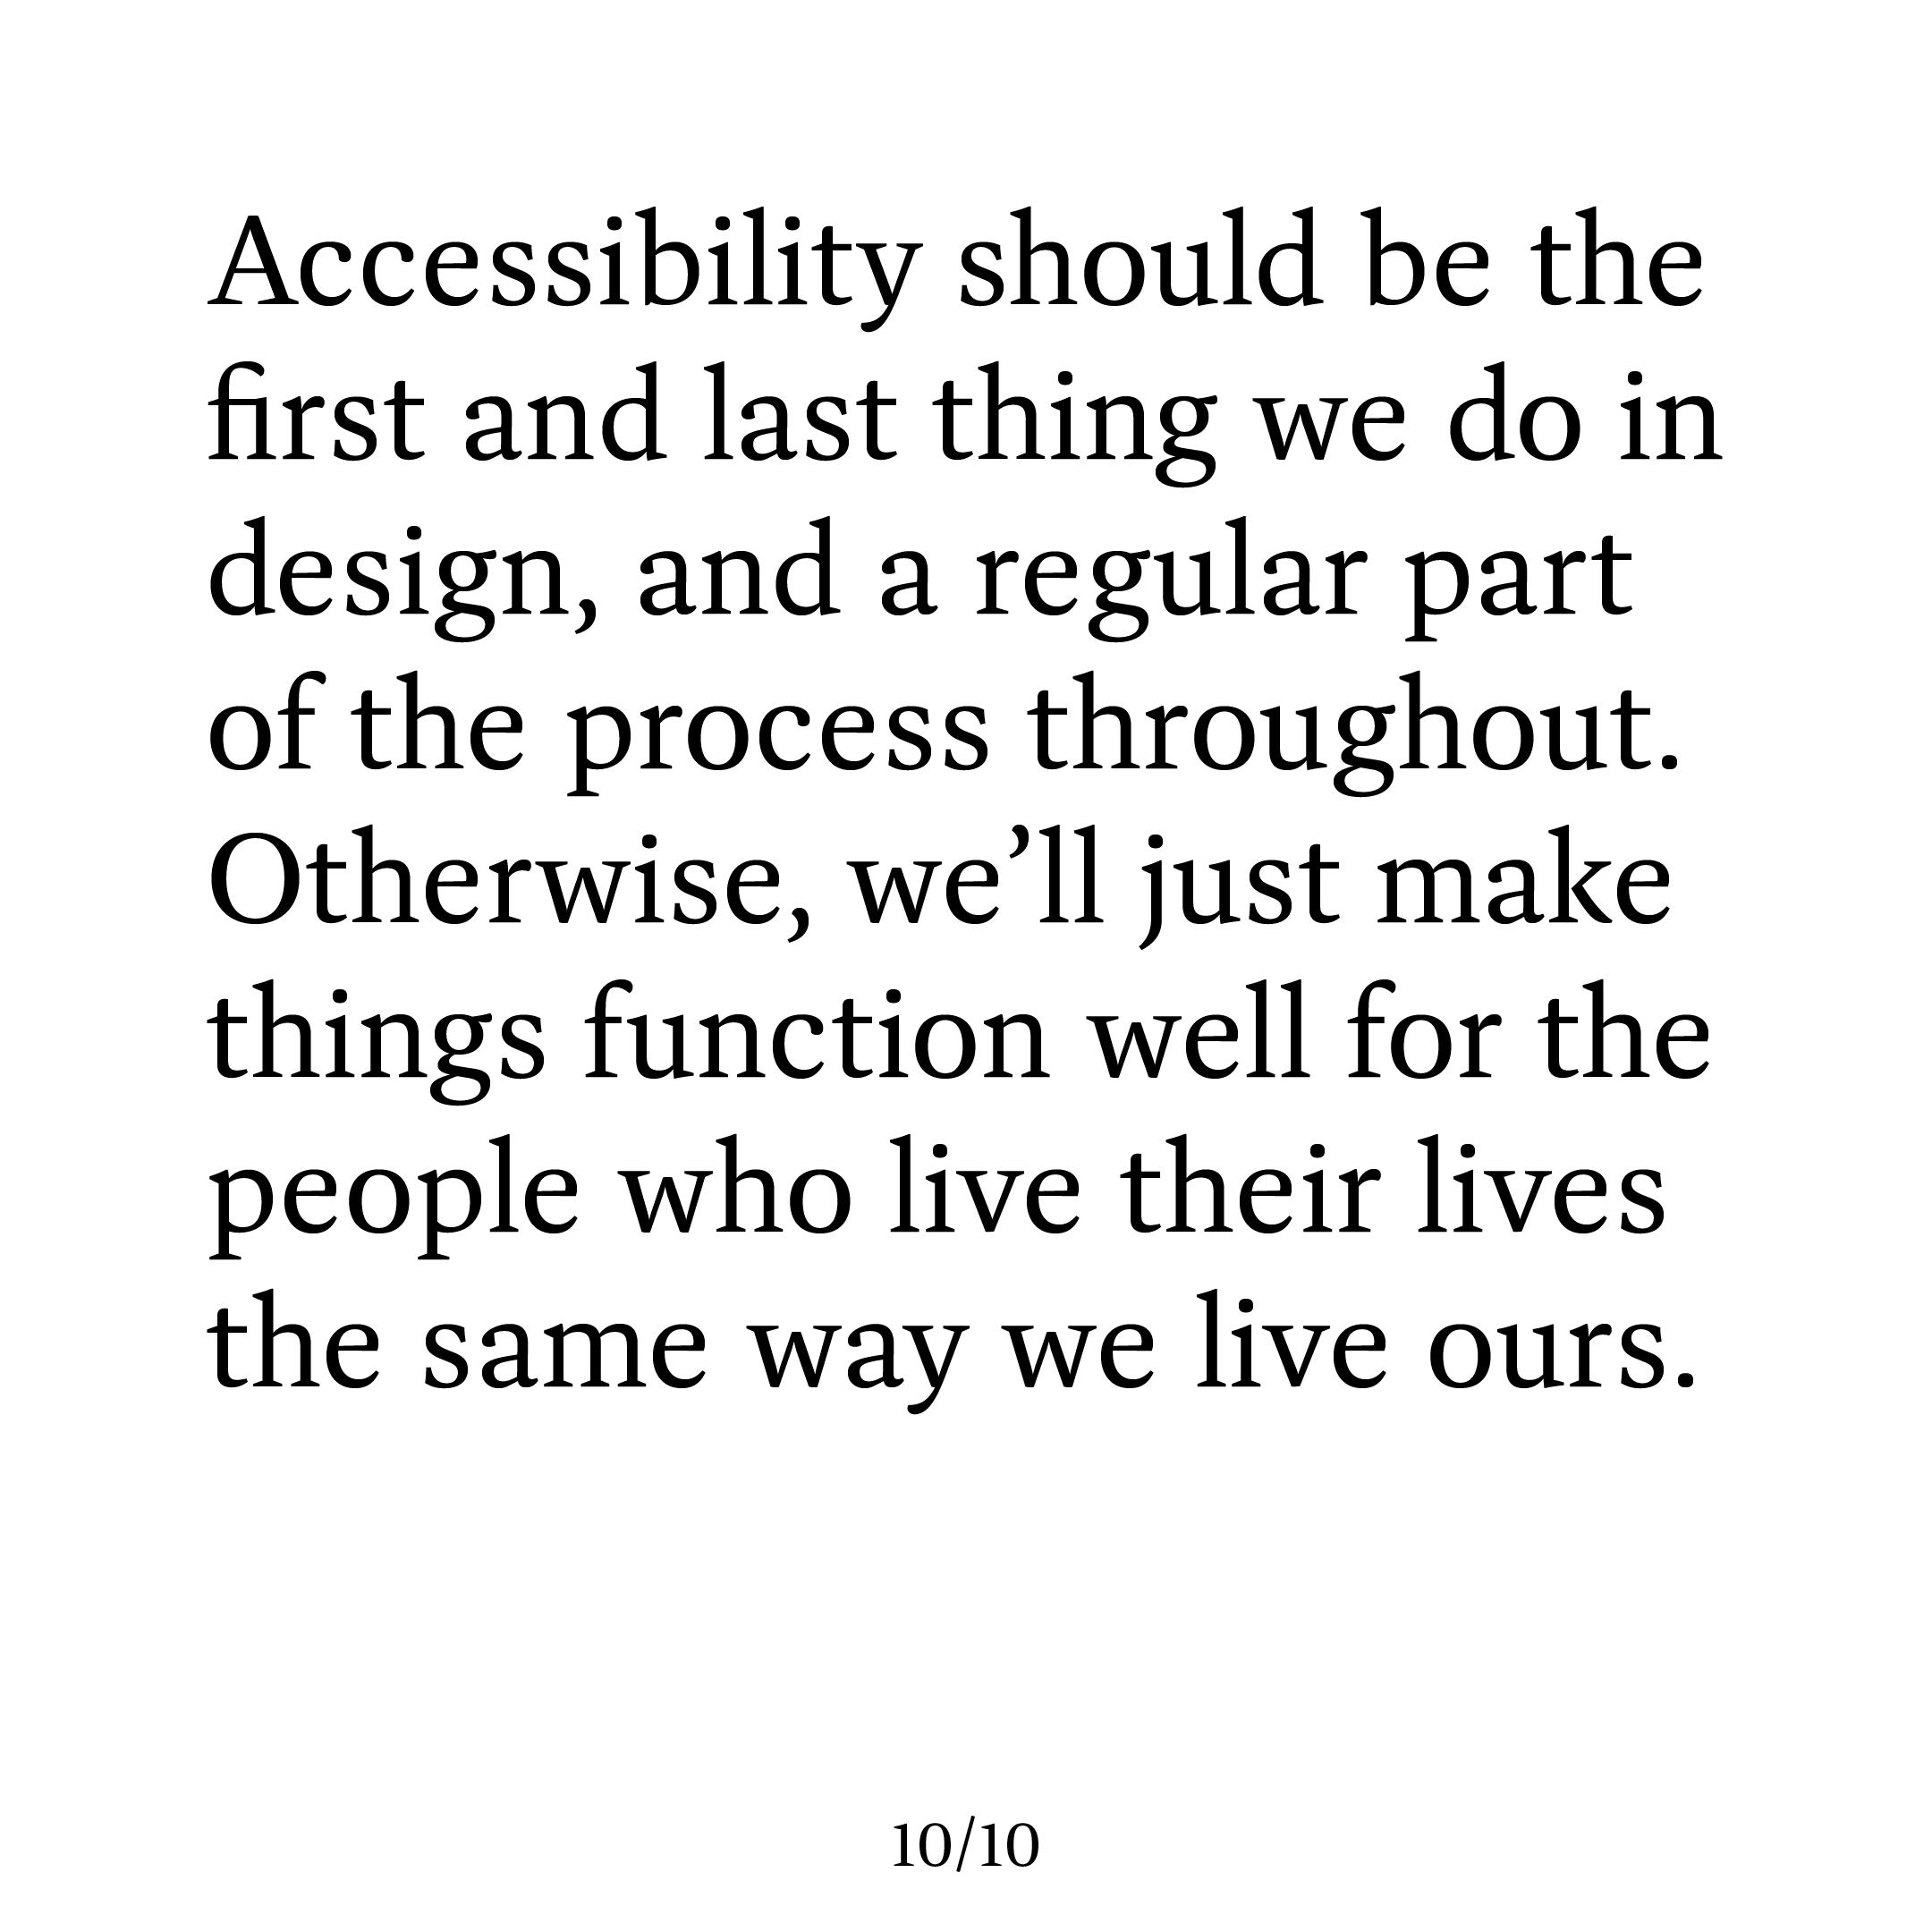 This final slide echoes the style of the first one, saying 'Accessibility should be the first and last thing we do in design, and a regular part of the process throughout. Otherwise, we’ll just make things function well for the people who live their lives the same way we live ours.'